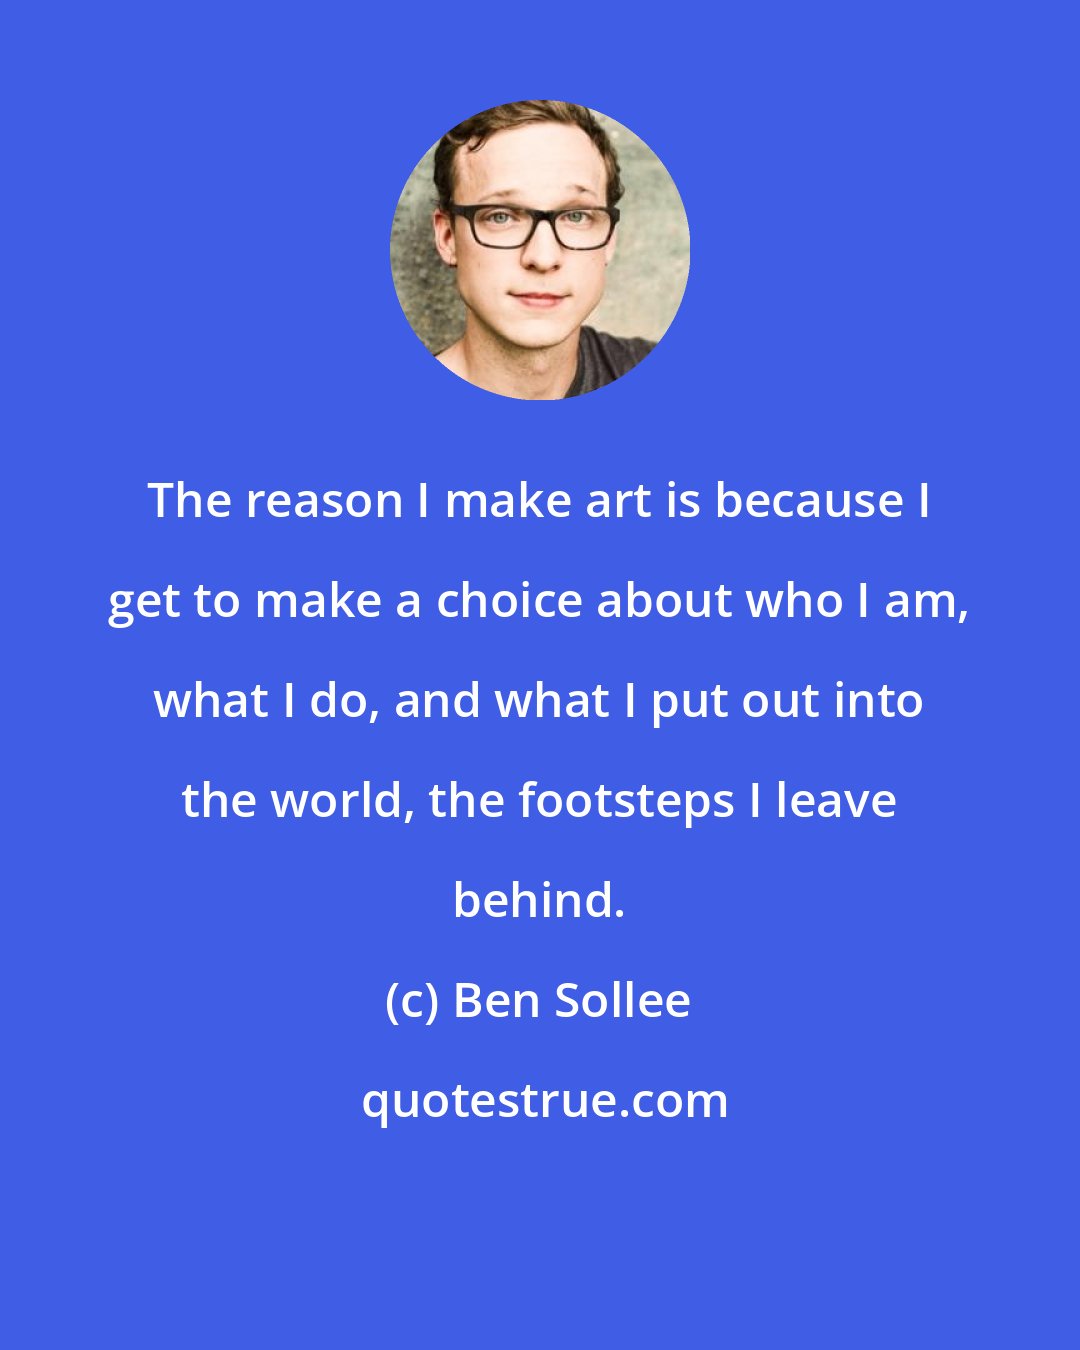 Ben Sollee: The reason I make art is because I get to make a choice about who I am, what I do, and what I put out into the world, the footsteps I leave behind.